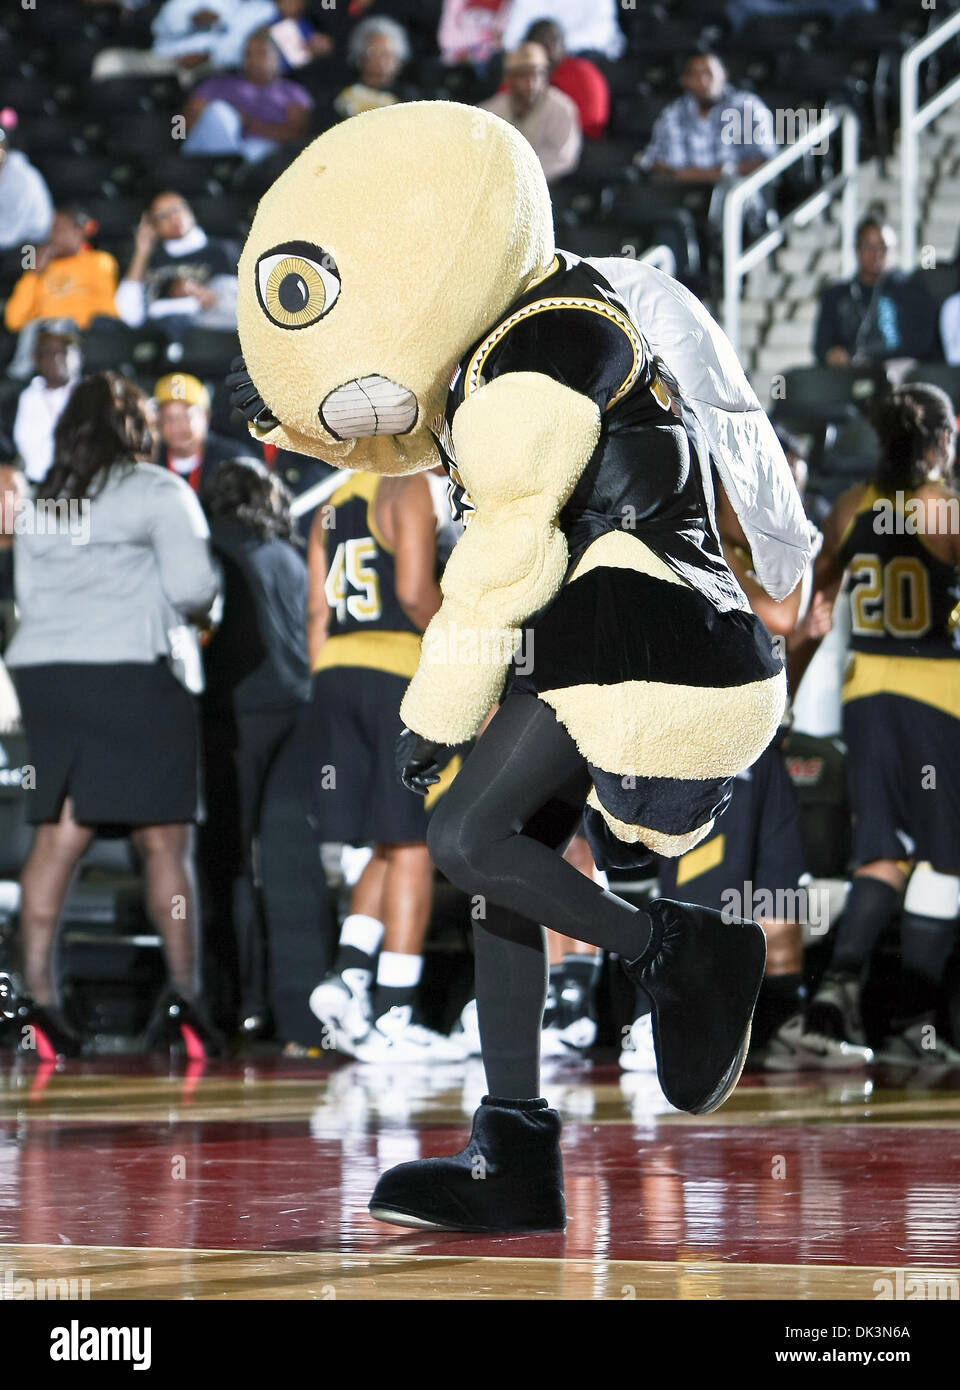 Mar. 9, 2011 - Garland, Texas, United States of America - The Alabama State Hornets mascot in action during the SWAC Tournament game between the Southern Lady Jaguars and the Alabama State Hornets at the Special Events Center in Garland, Texas. Southern defeats Alabama State 58 to 39. (Credit Image: © Dan Wozniak/Southcreek Global/ZUMAPRESS.com) Stock Photo